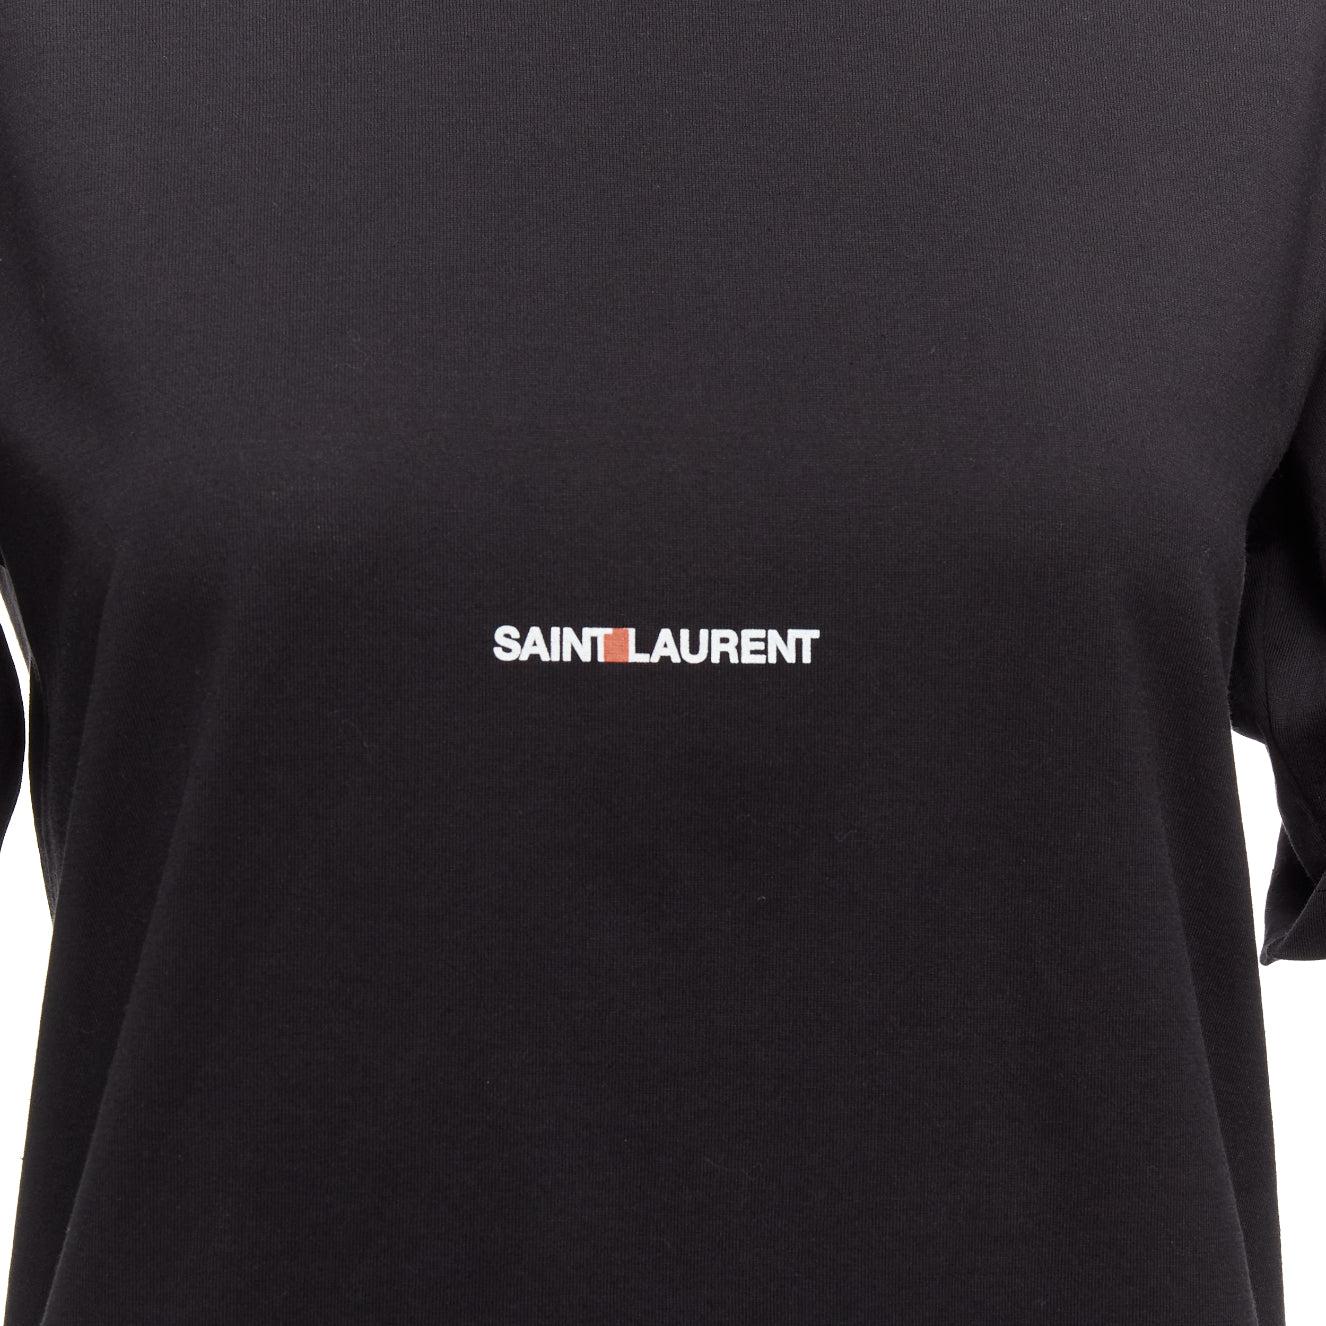 SAINT LAURENT 2017 black cotton box white logo boxy half sleeve tshirt XS
Reference: AAWC/A01117
Brand: Saint Laurent
Collection: 2017
Material: Cotton
Color: Black, White
Pattern: Solid
Closure: Pullover
Extra Details: Plain back.
Made in: